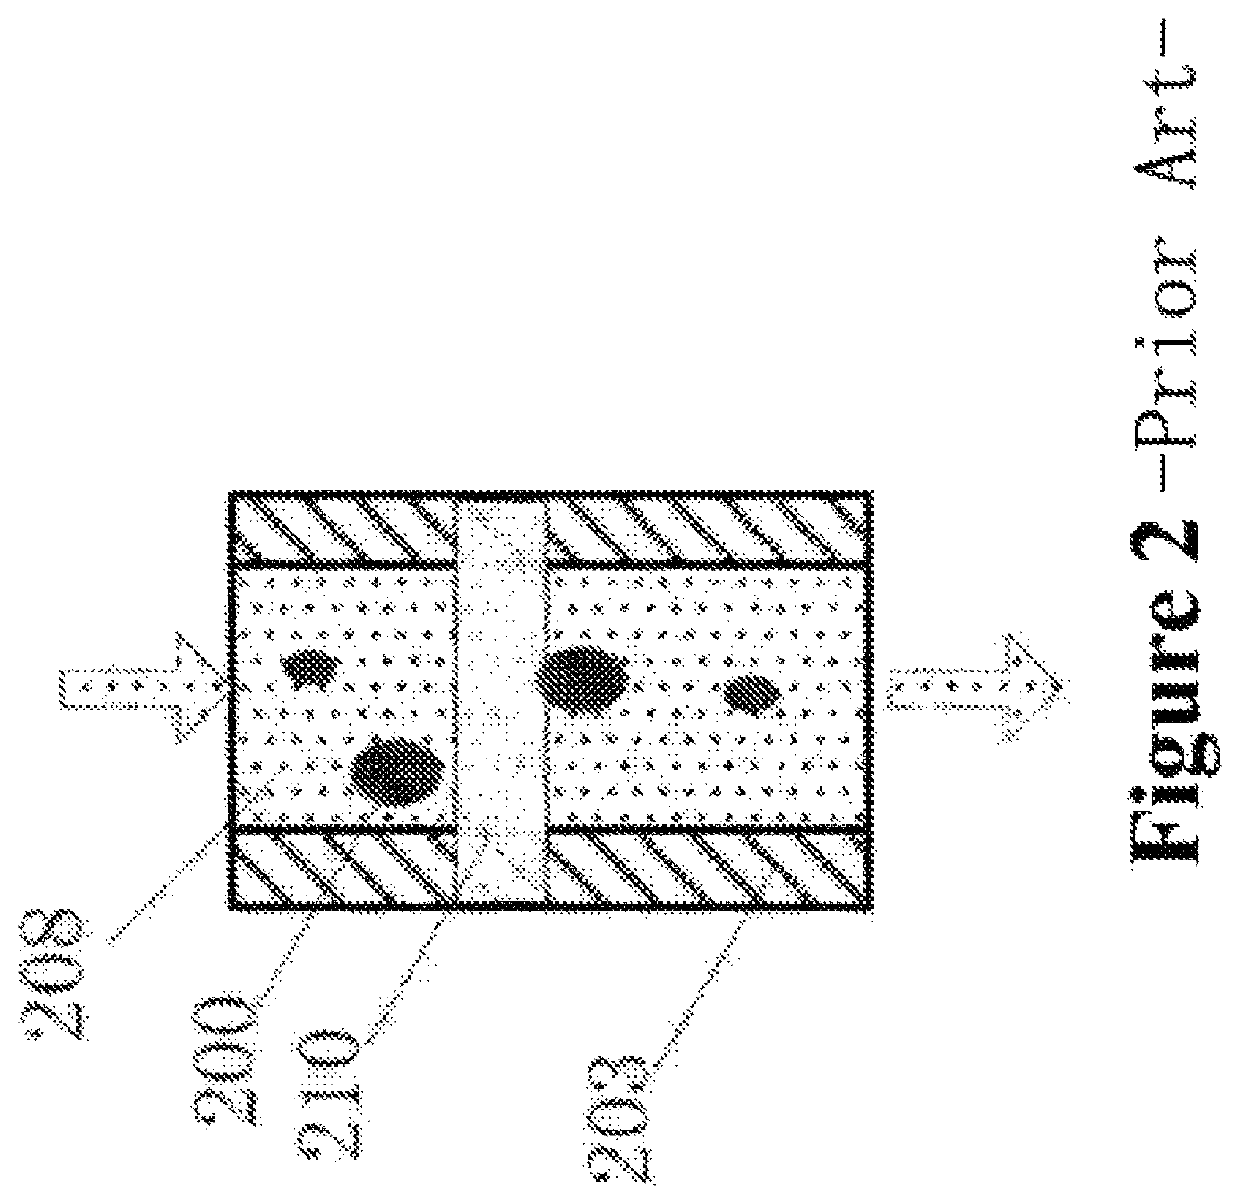 Particle counting method and system